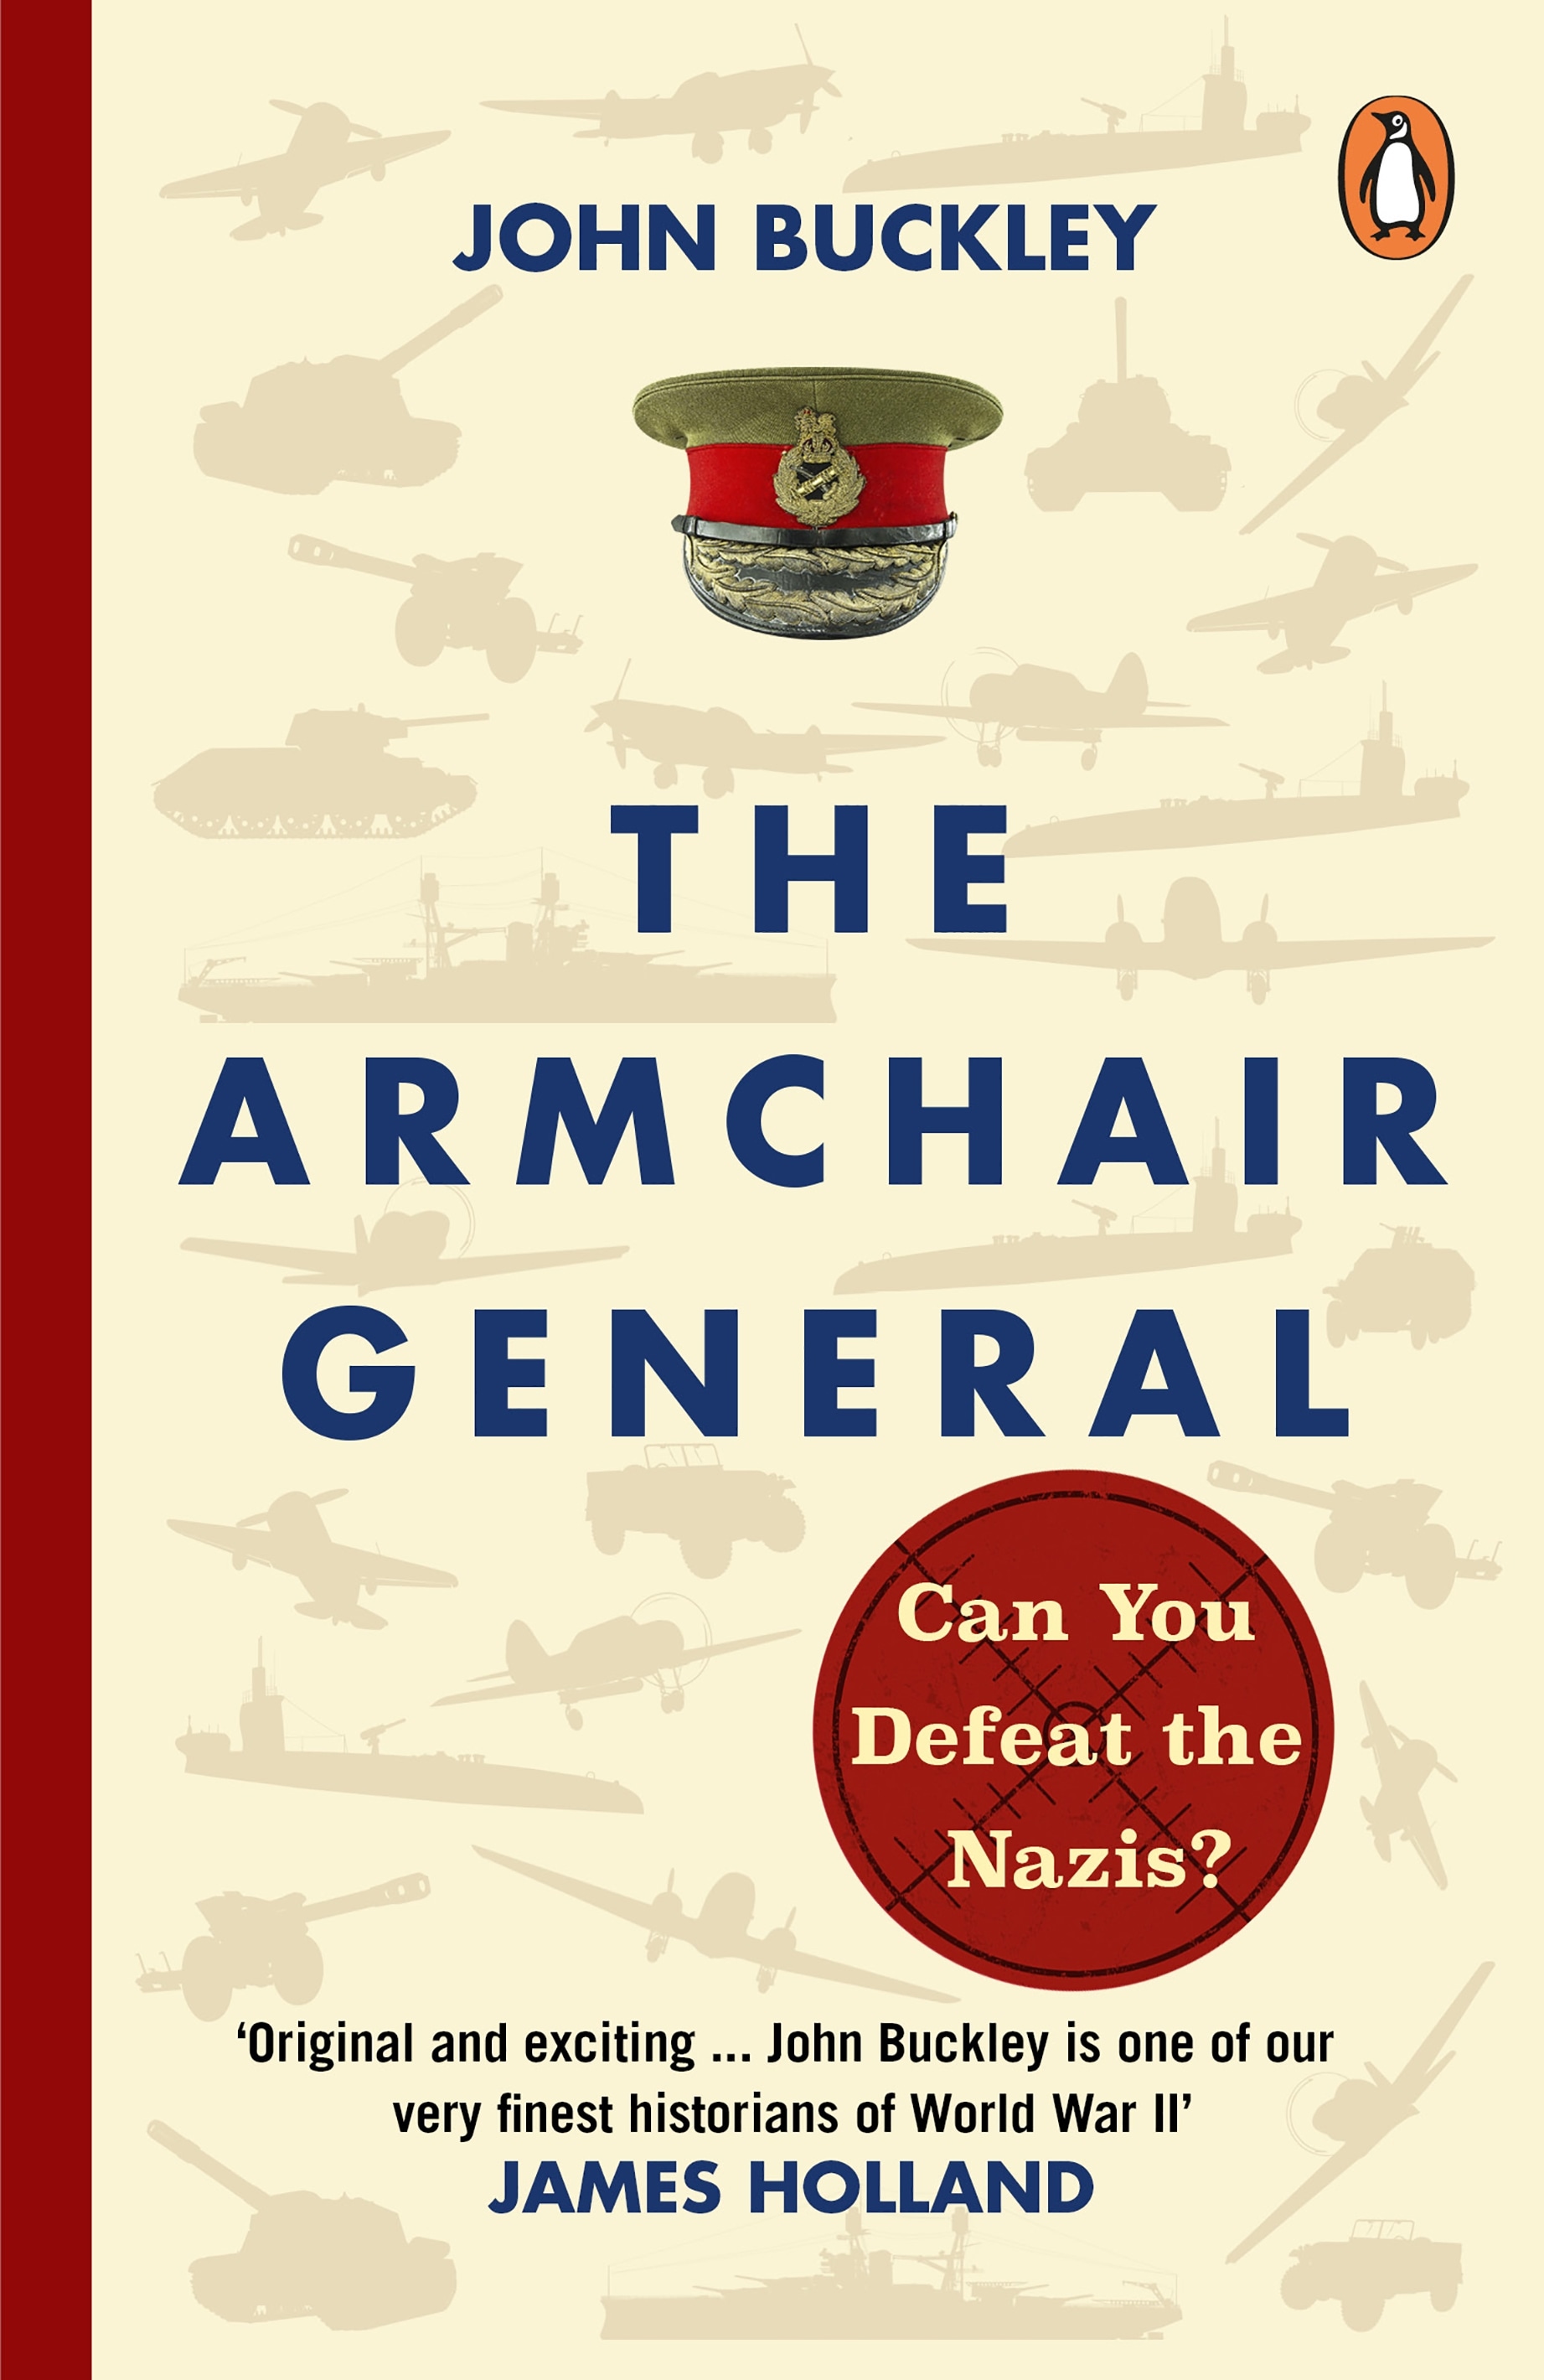 Book “The Armchair General” by John Buckley — October 27, 2022